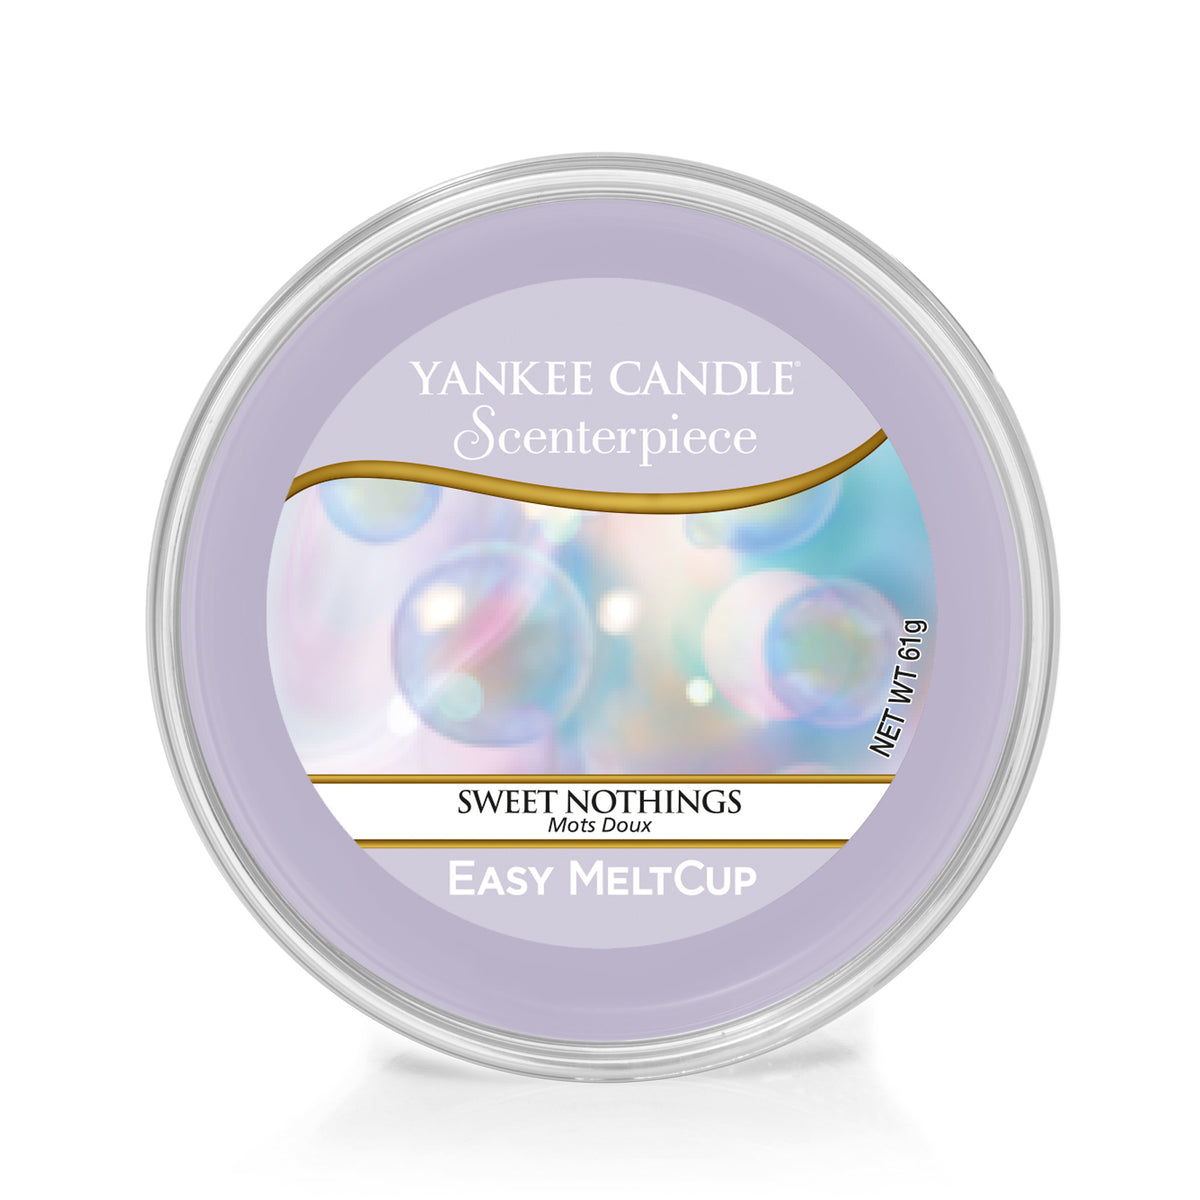 SWEET NOTHING -Yankee Candle- Easy MeltCup Yankee Candle